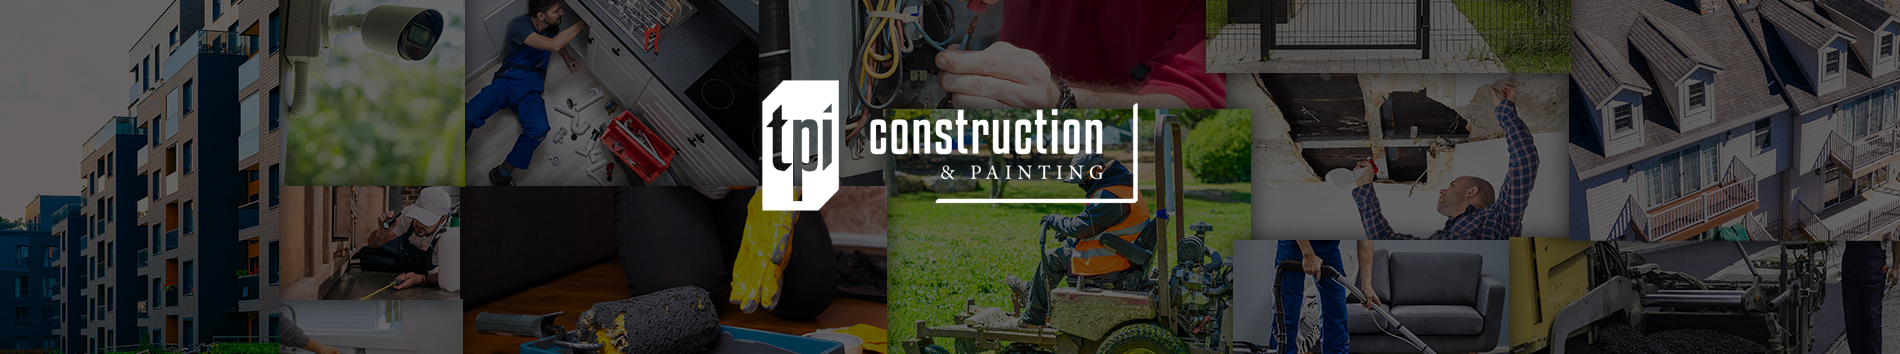 TPI Construction & Painting Inc